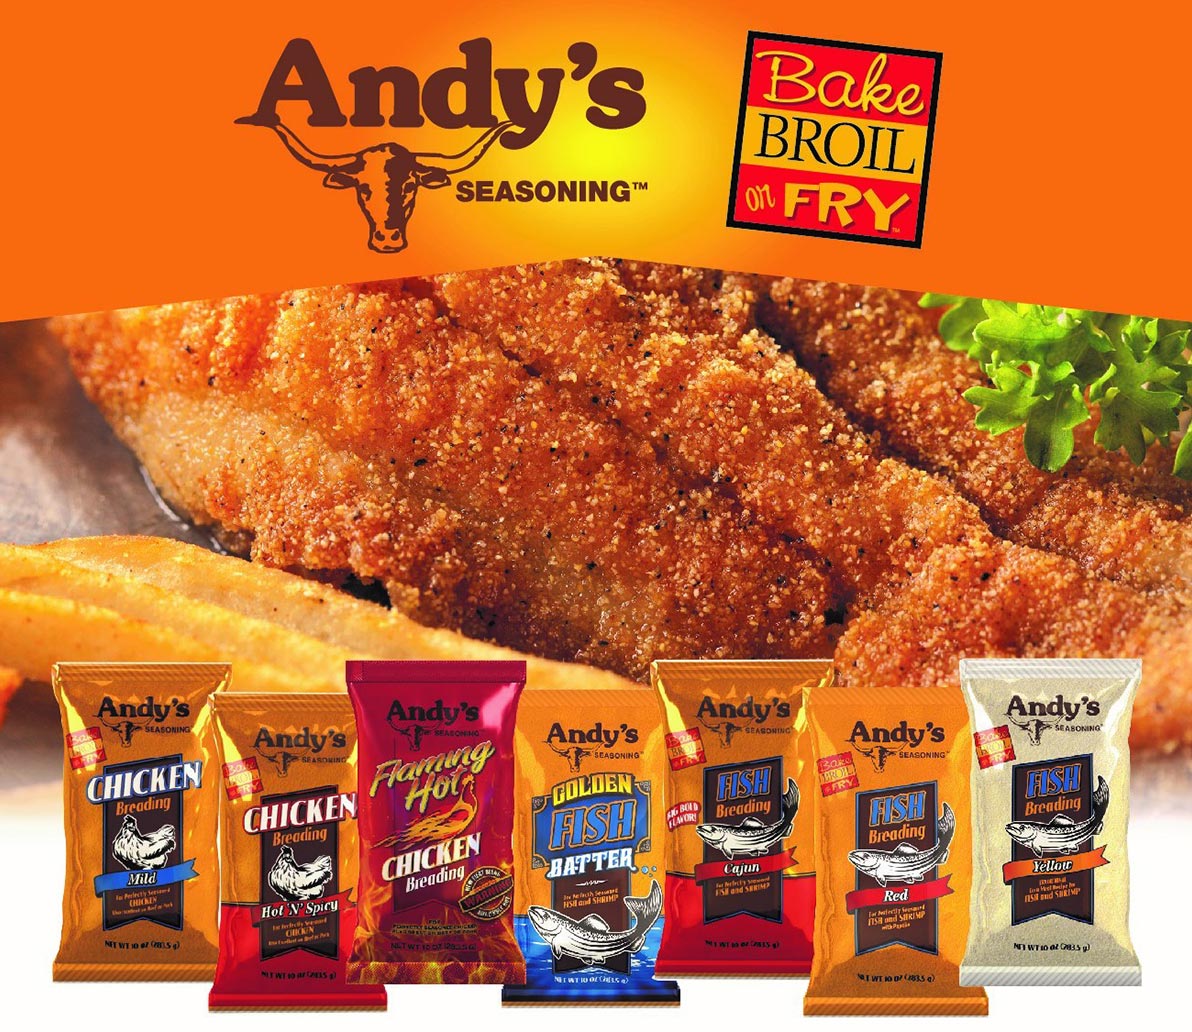 Andys Seasoning product montage